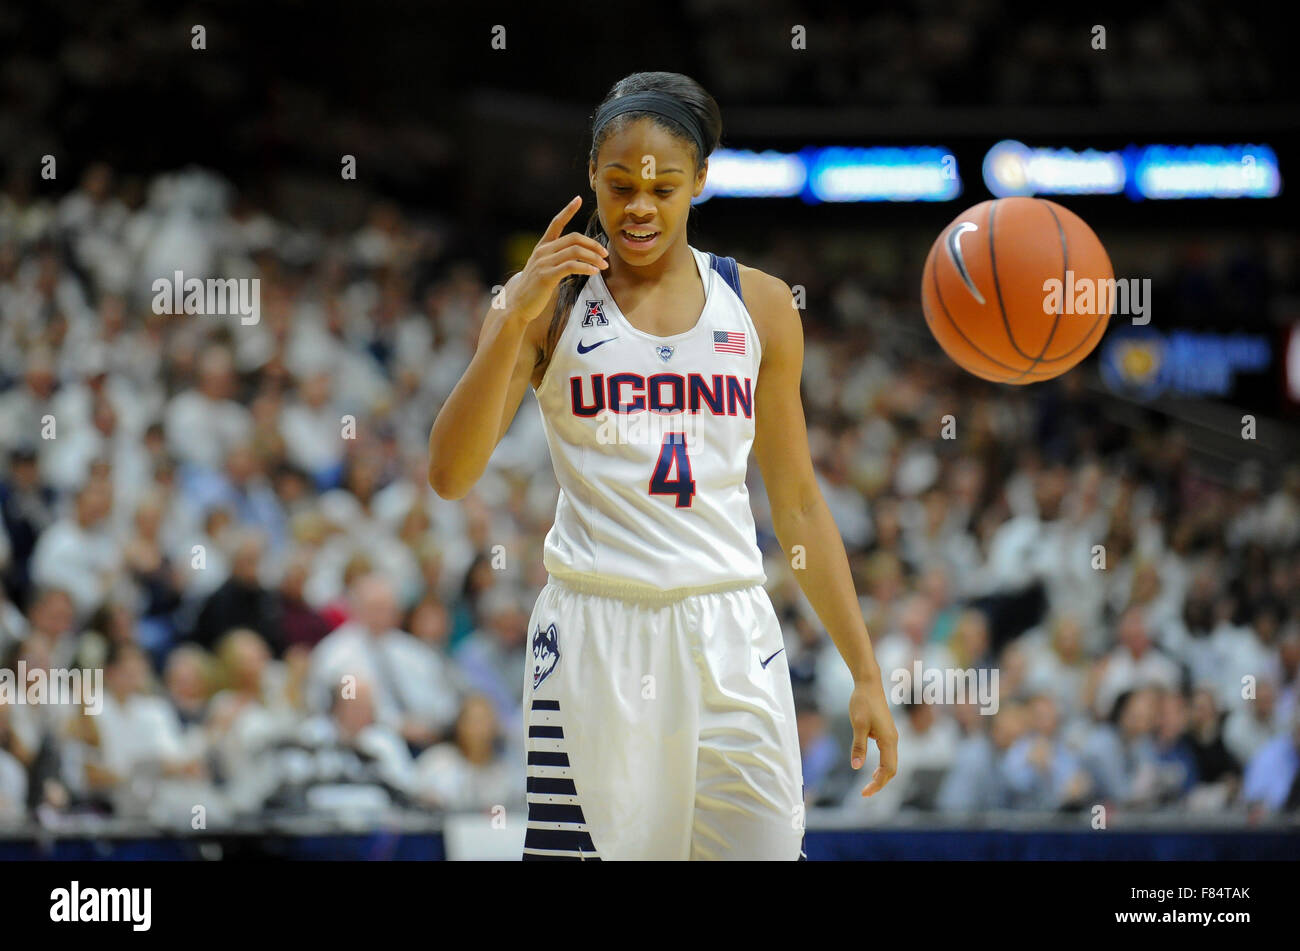 Stores, Connecticut, USA. 5th Dec, 2015. Moriah Jefferson (4) of Uconn in action during a game against the Notre Dame Fighting Irish at Gampel Pavilion in Stores, Connecticut. Gregory Vasil/Cal Sport Media/Alamy Live News Stock Photo